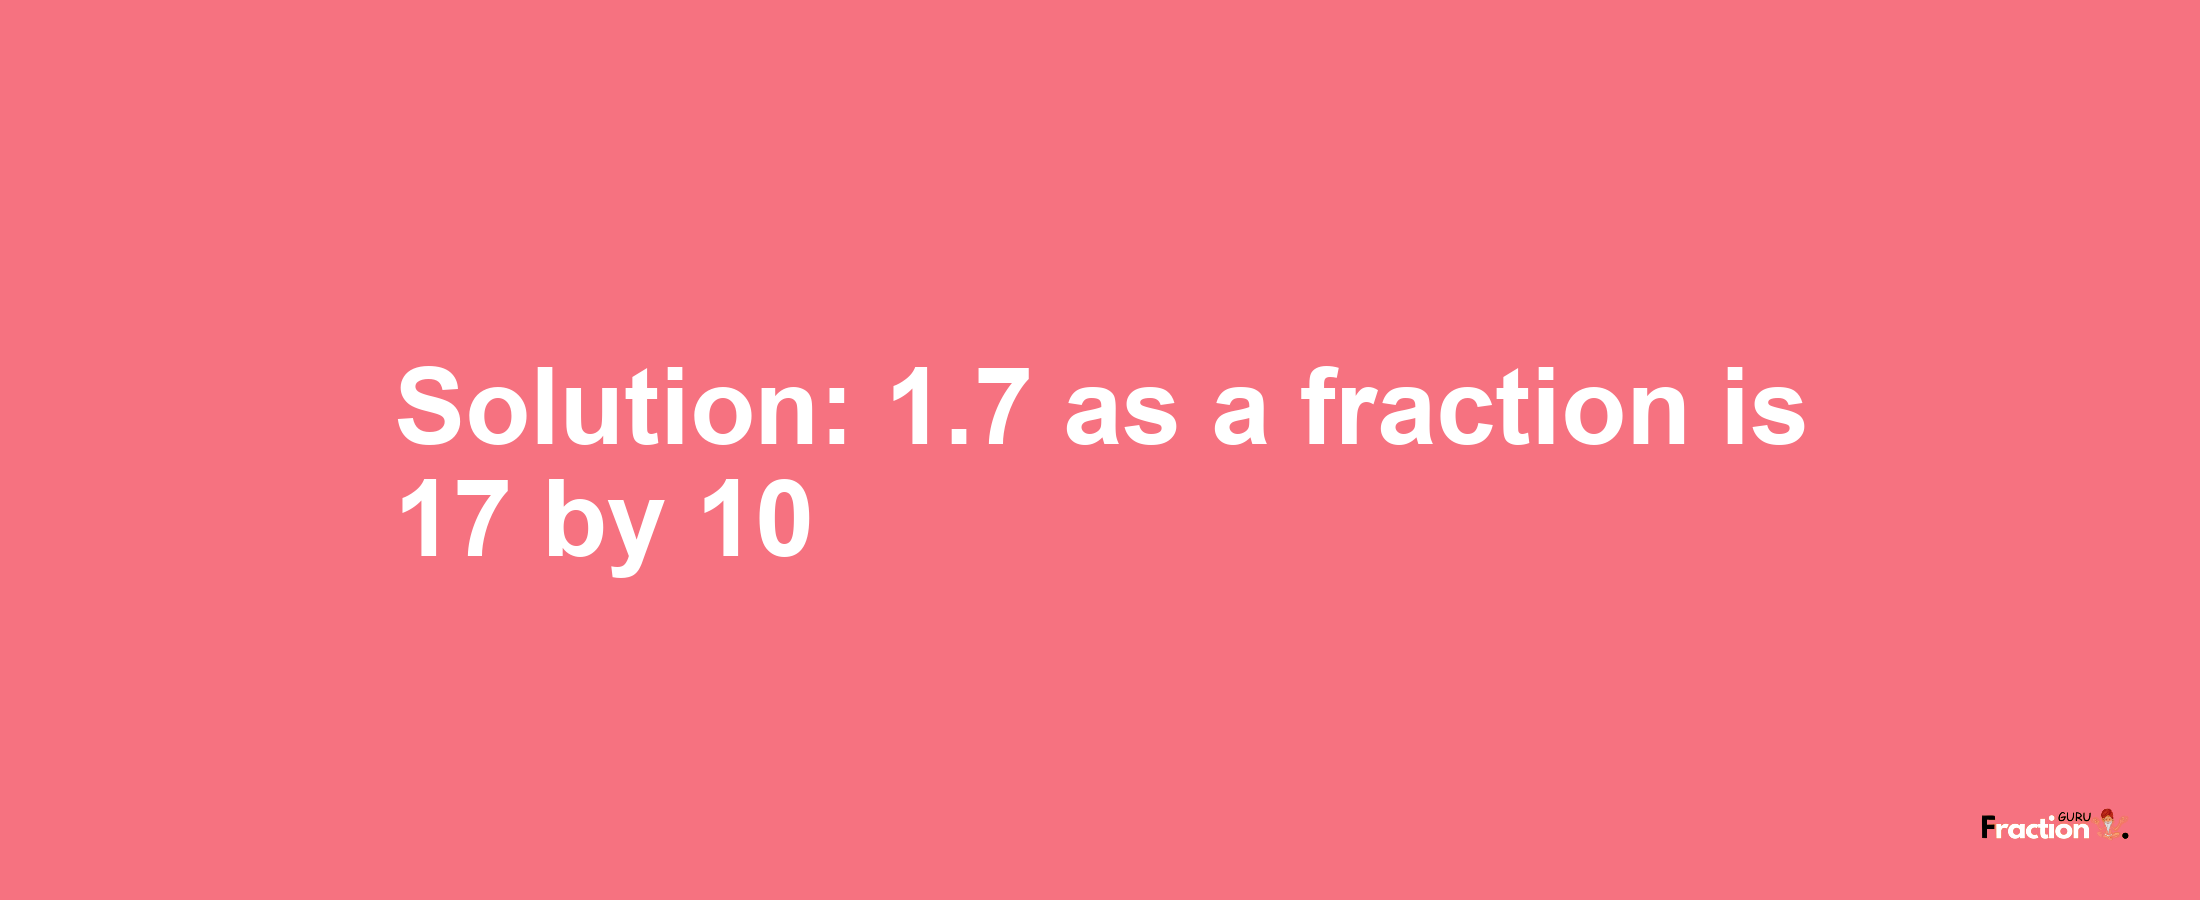 Solution:1.7 as a fraction is 17/10